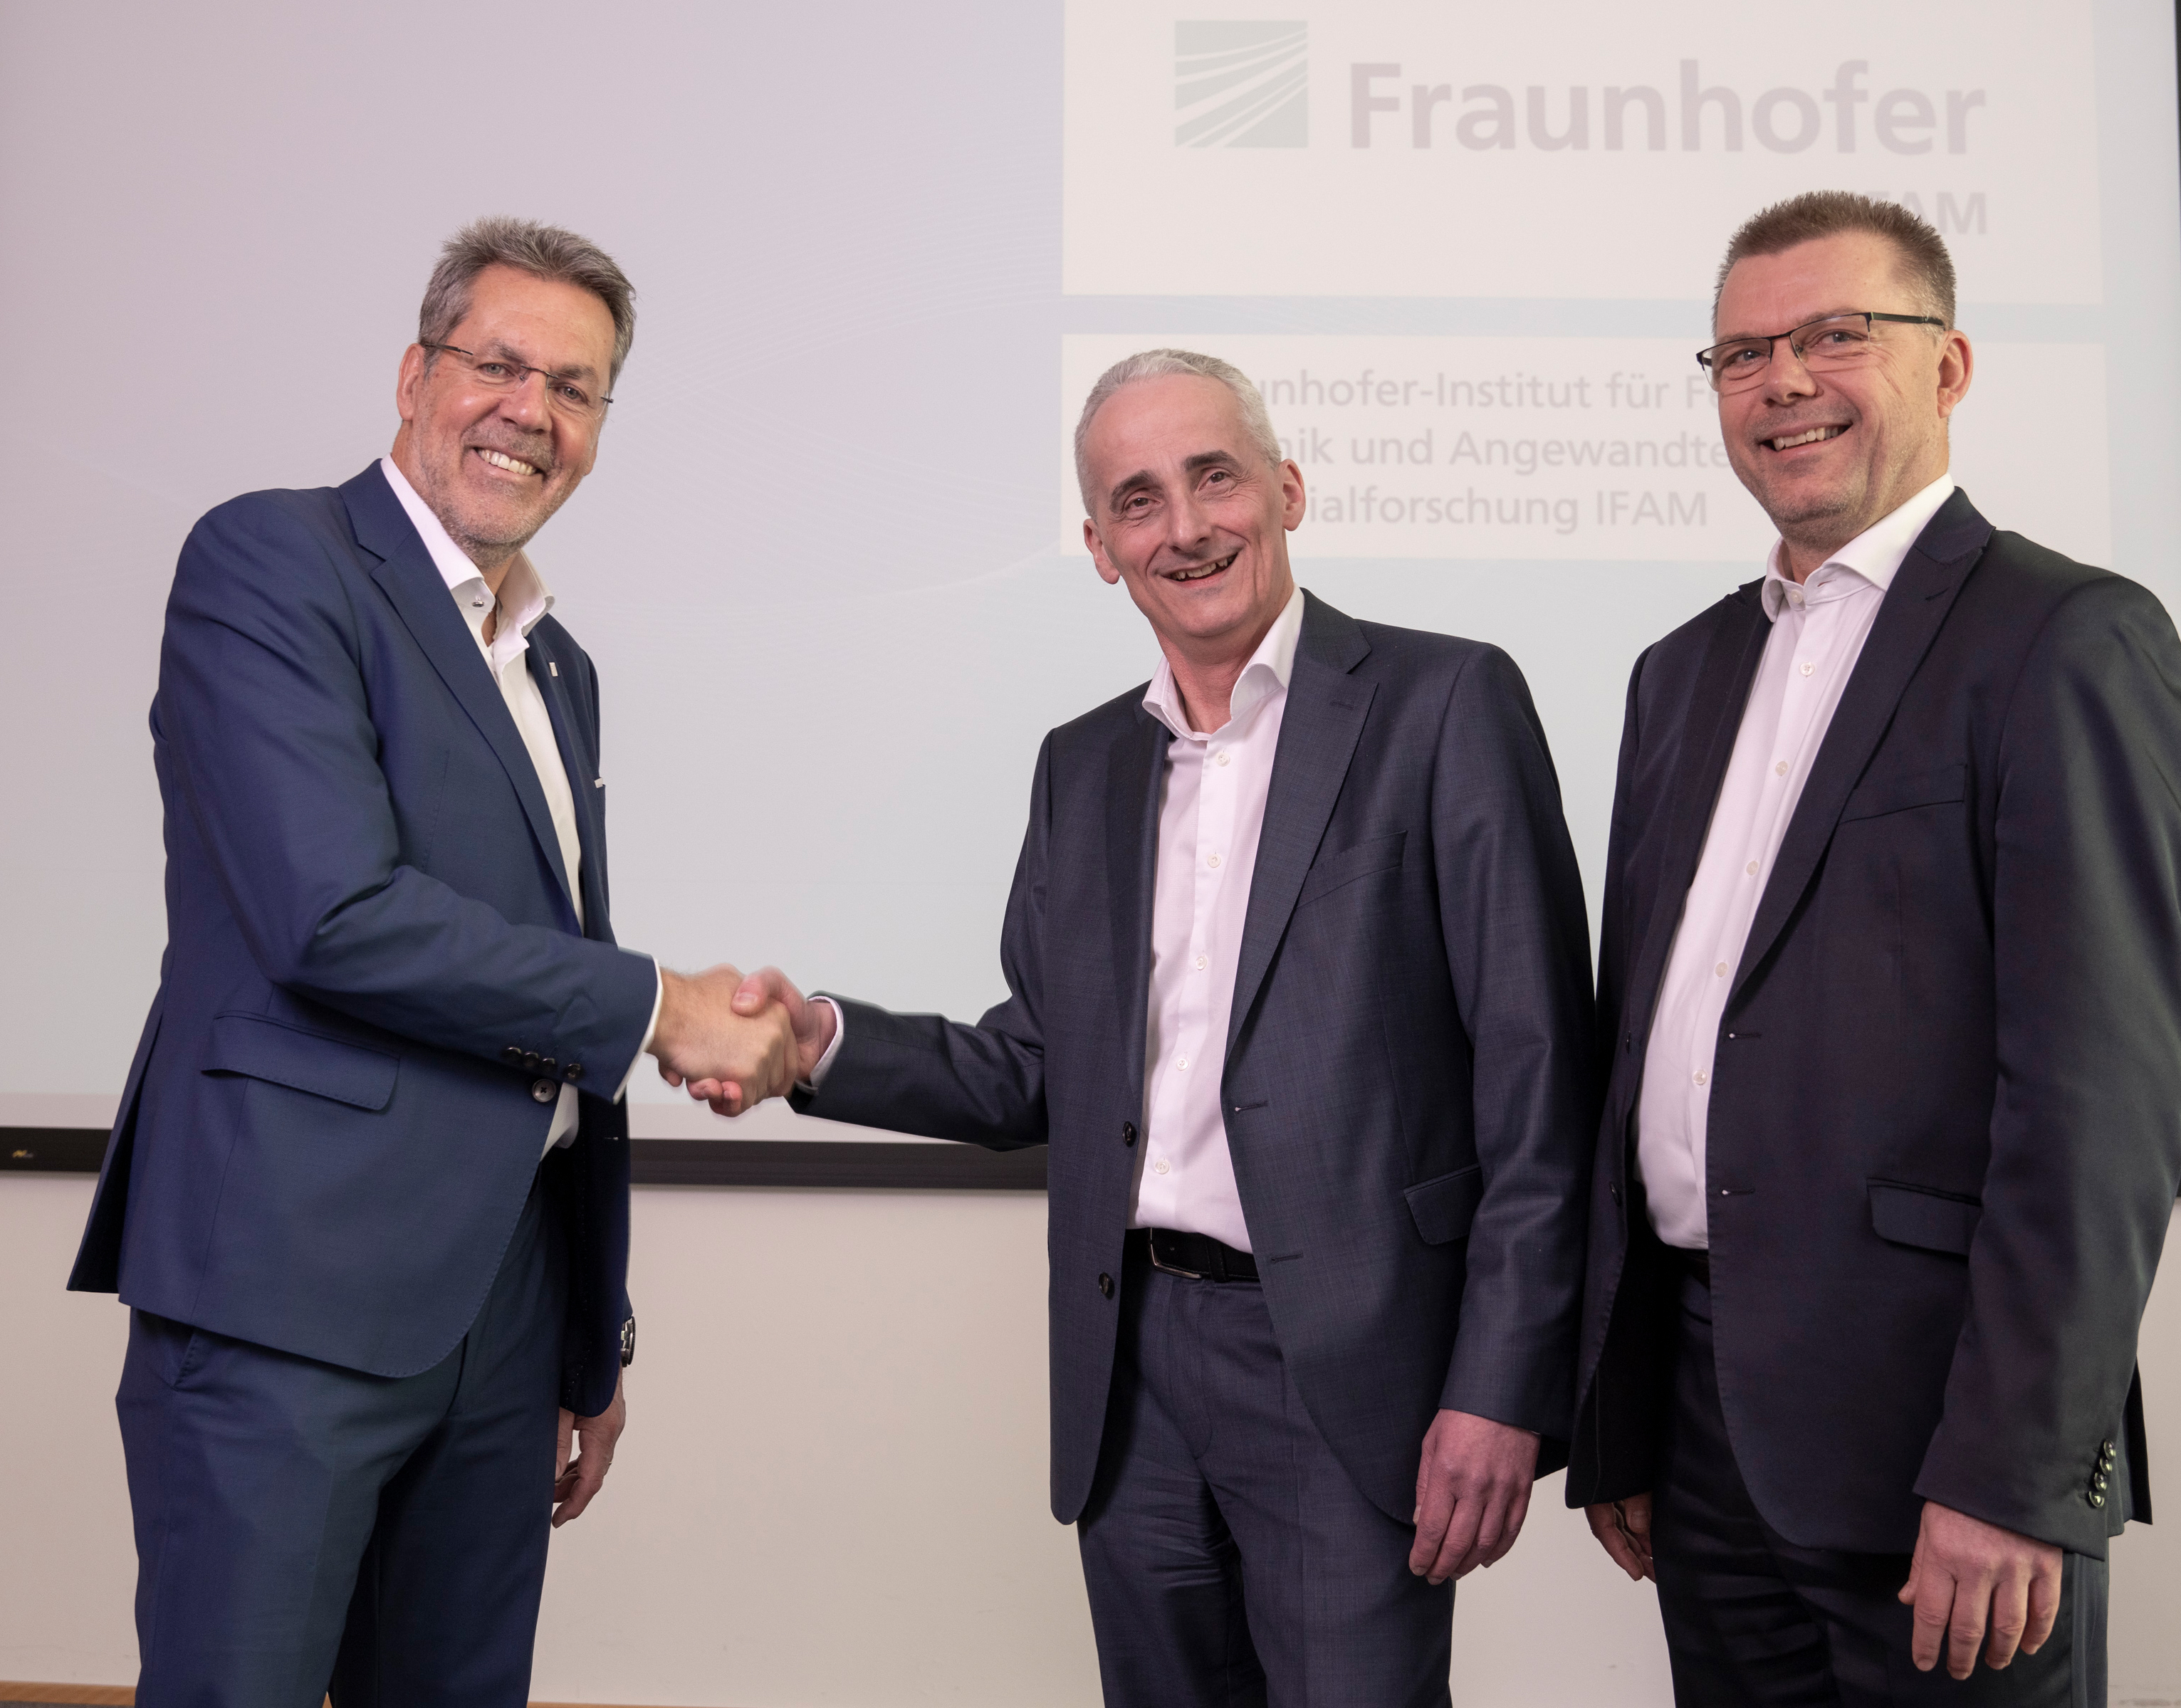 Prof. Dr.-Ing. Matthias Busse was bid farewell to his retirement by Prof. Dr. Bernd Mayer and Prof. Dr.-Ing. Thomas Weißgärber (from left to right). They will now jointly lead Fraunhofer IFAM into the future.